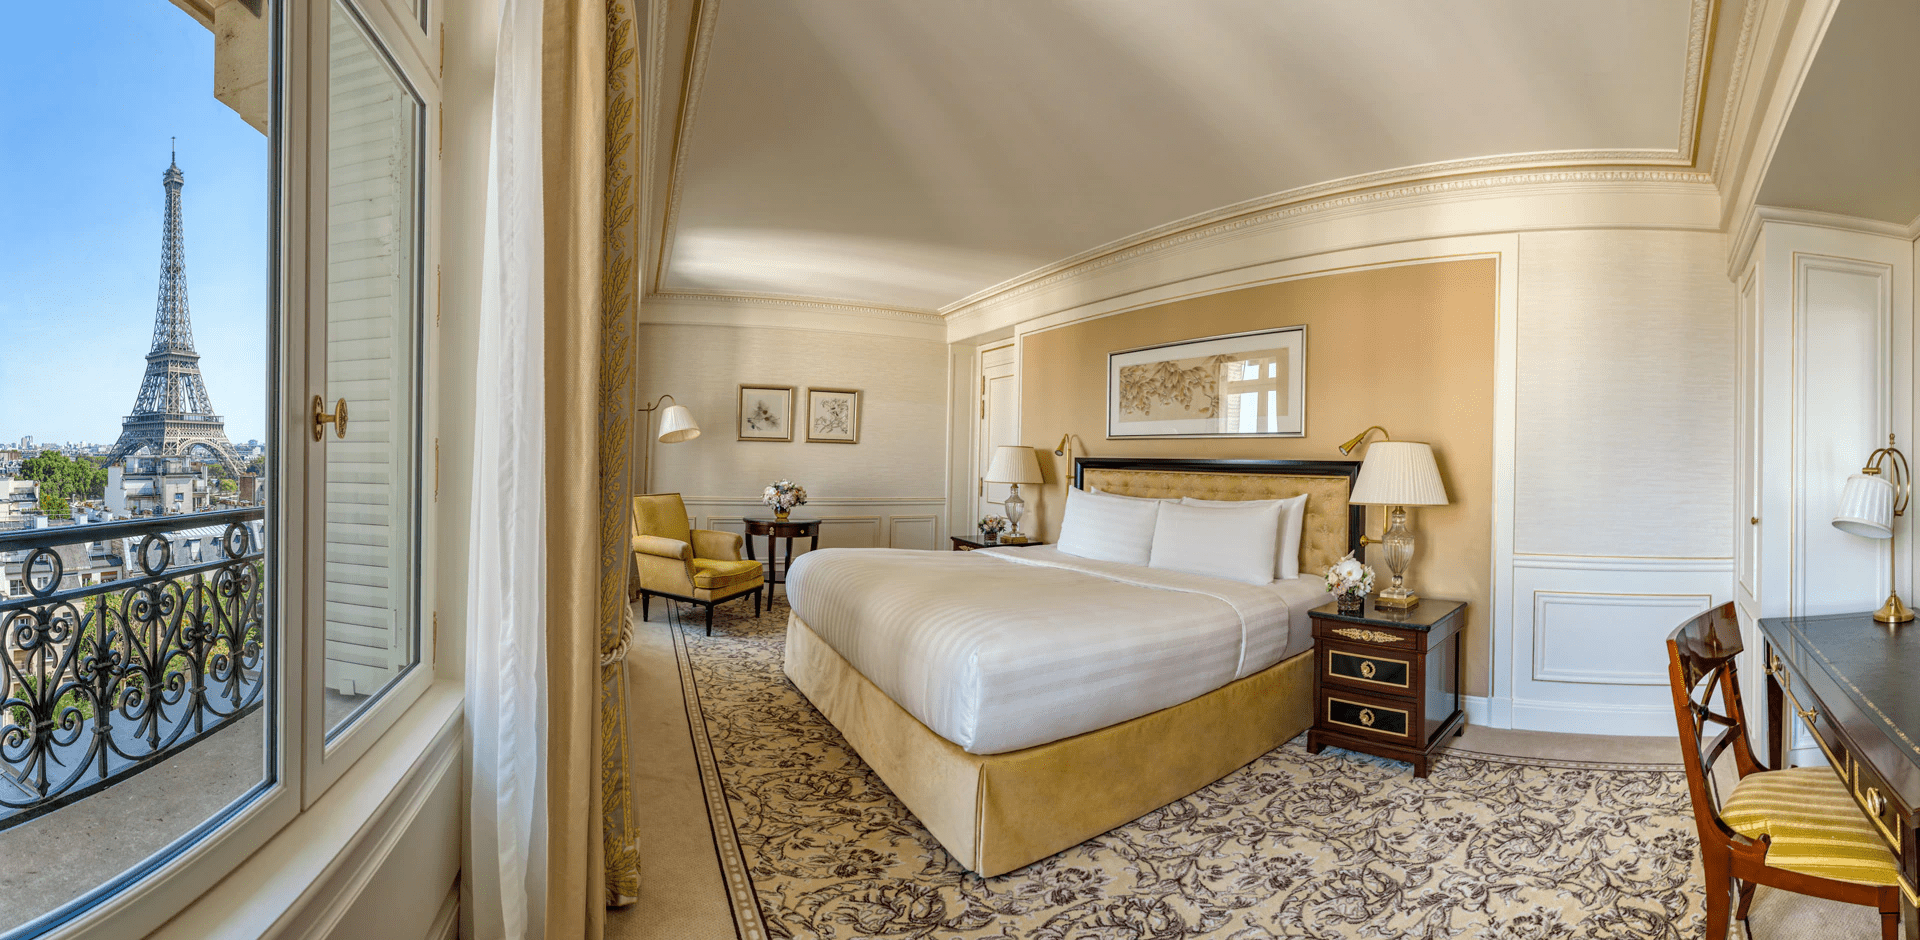 Your stay at Shangri-La Paris comes with a view you may have only seen on postcards